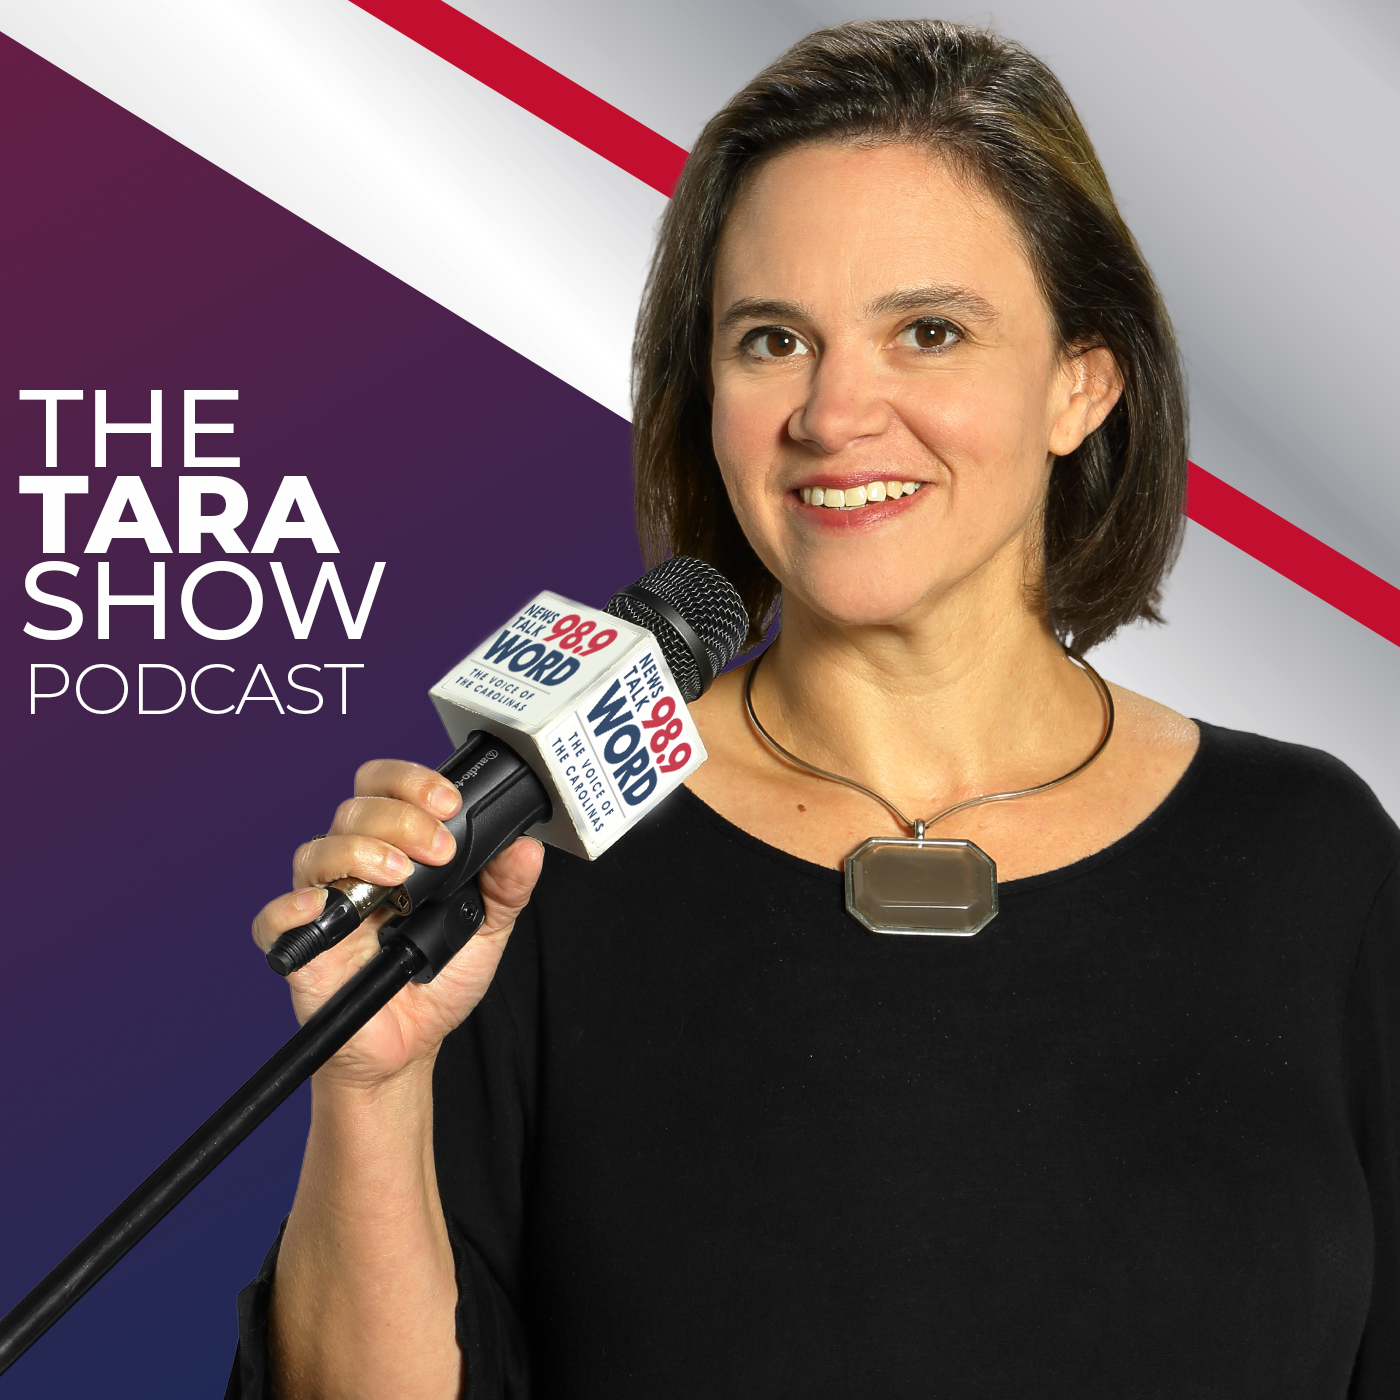 Hour 2: The Tara Show - “Biden’s Blessing of Iran’s Attack on Israel” “The Trump Jury Selection” “Inflationary Patterns of the Left”  “Wild Life is not your Friend” 